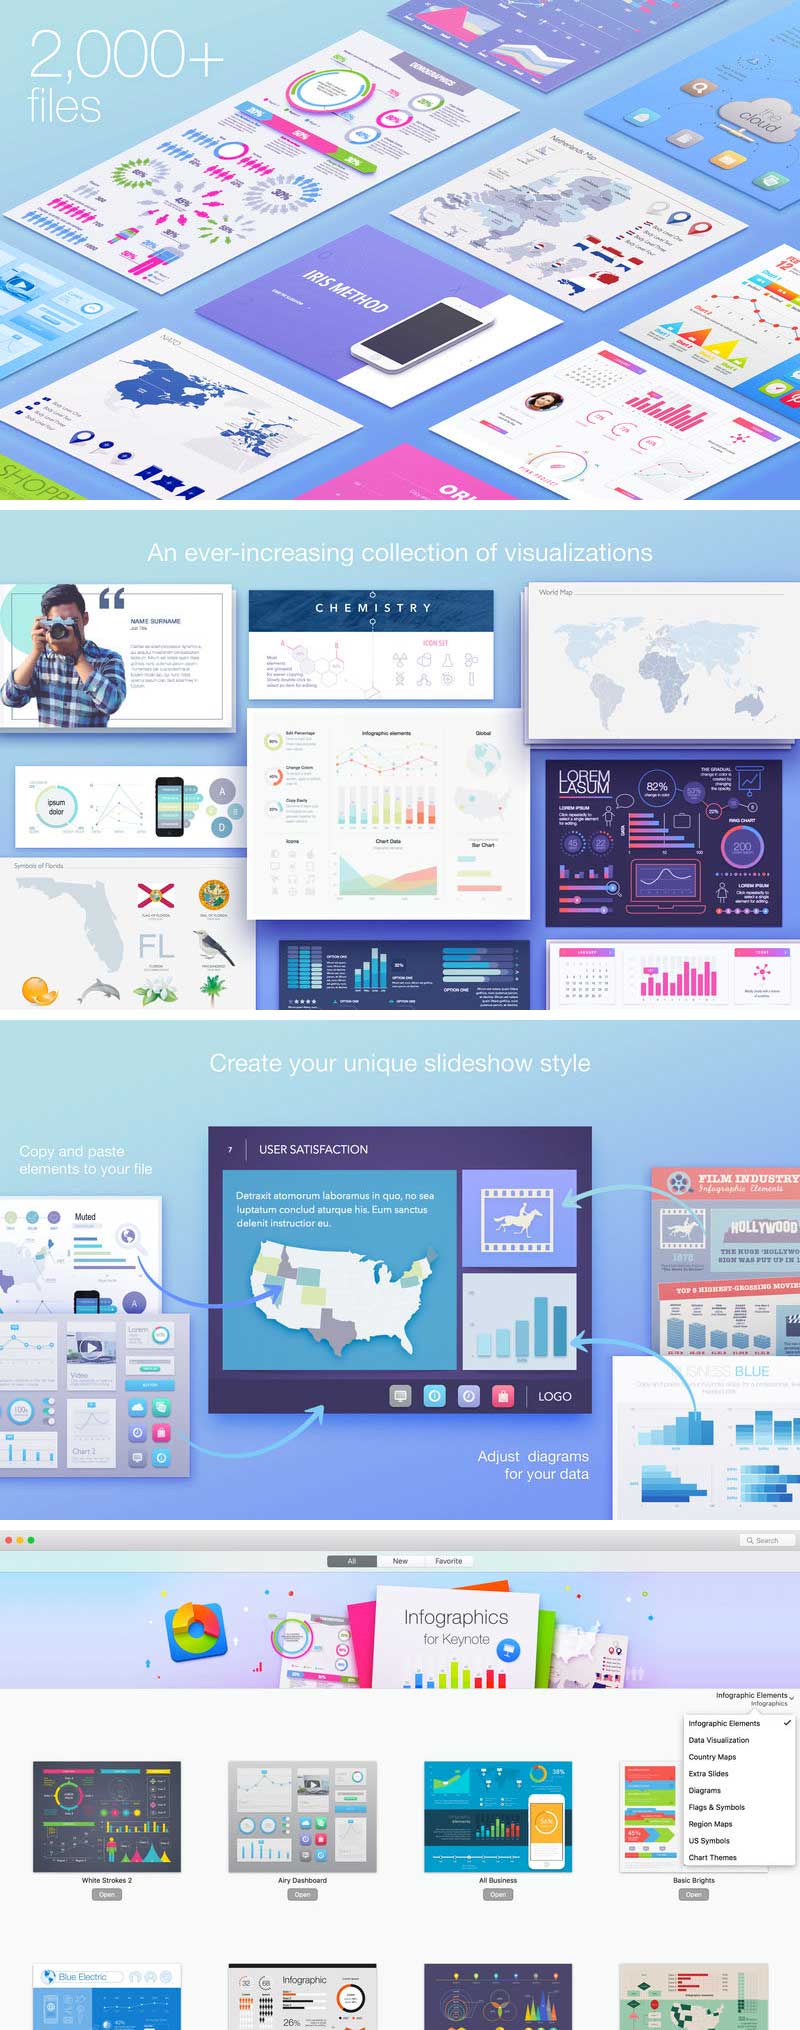 Infographics lab for keynote 3.3.4 download free